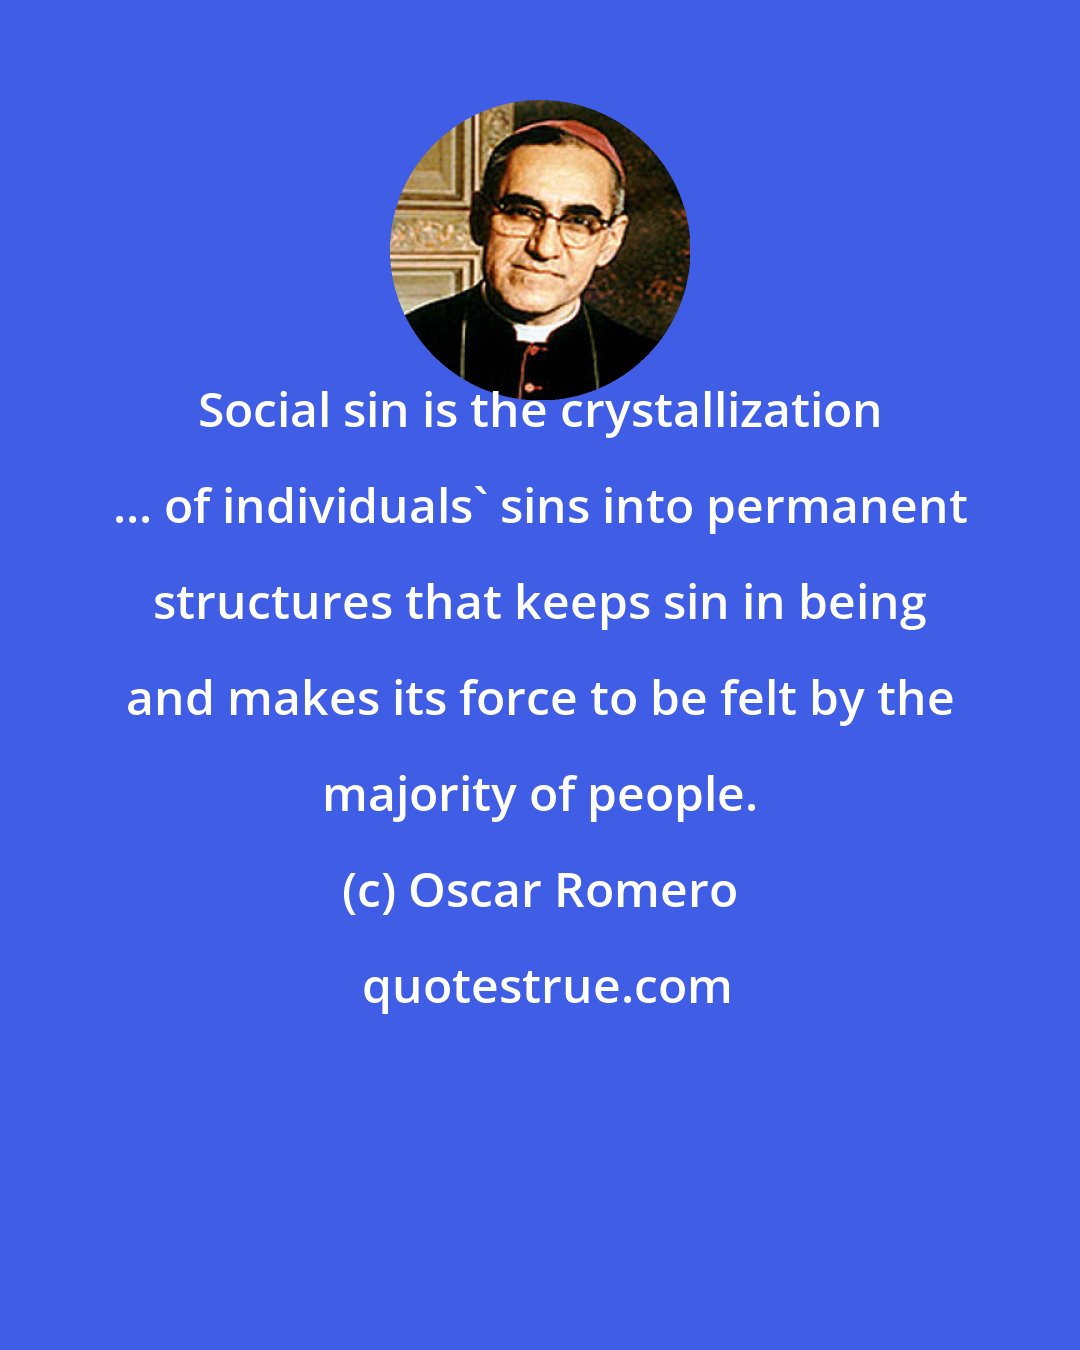 Oscar Romero: Social sin is the crystallization ... of individuals' sins into permanent structures that keeps sin in being and makes its force to be felt by the majority of people.